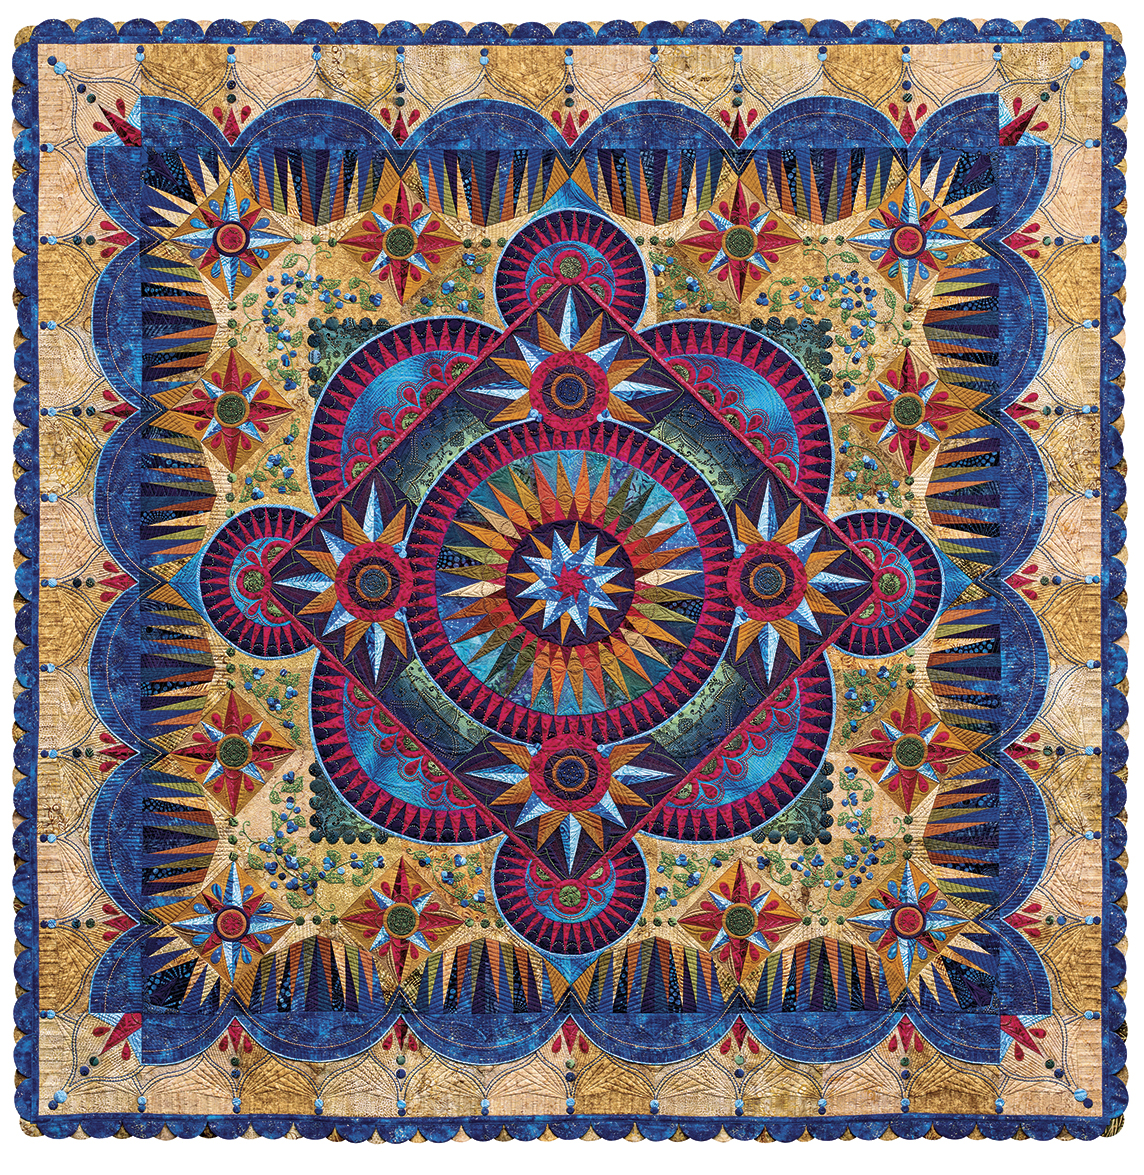 125,000 Awarded to AQS Contest Winners at AQS QuiltWeek®Paducah, KY